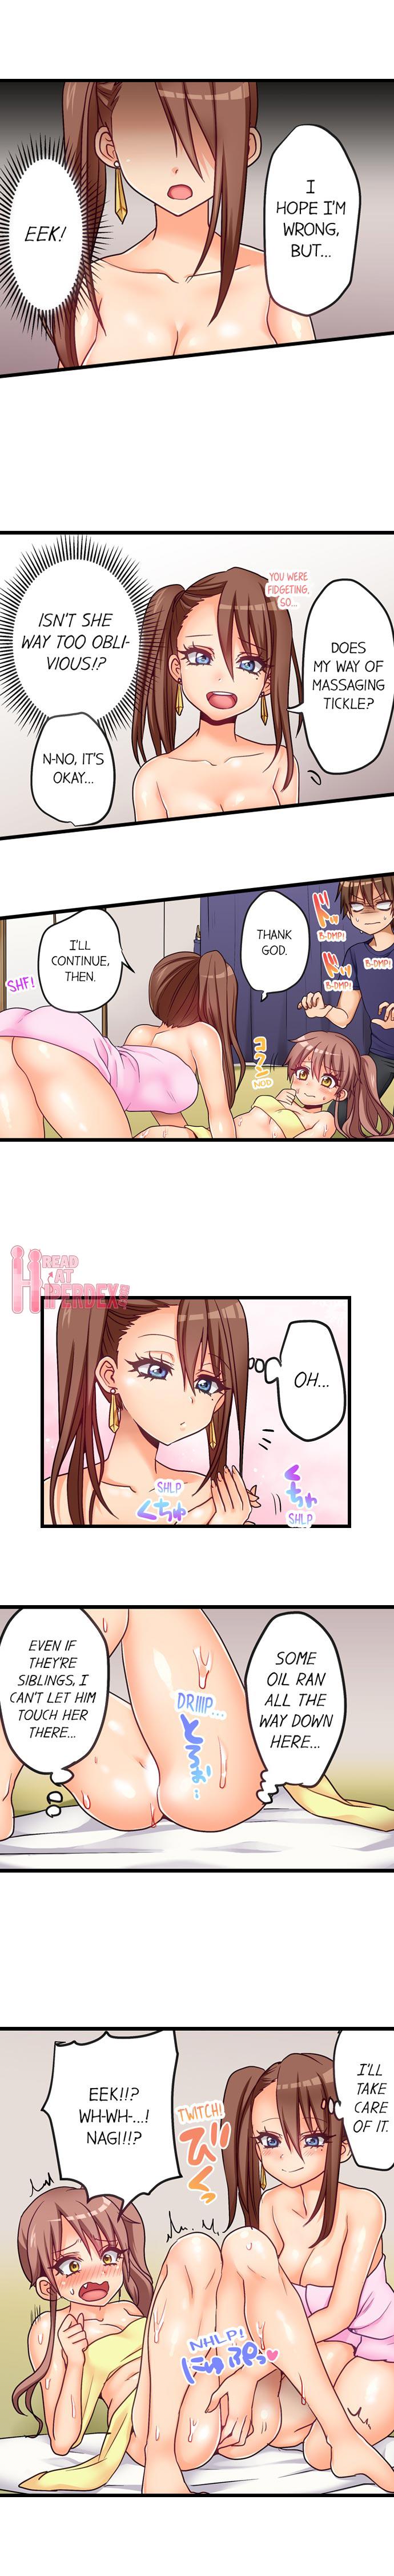 Ddf Porn Porori] My First Time is with.... My Little Sister?! - Original Village - Page 5